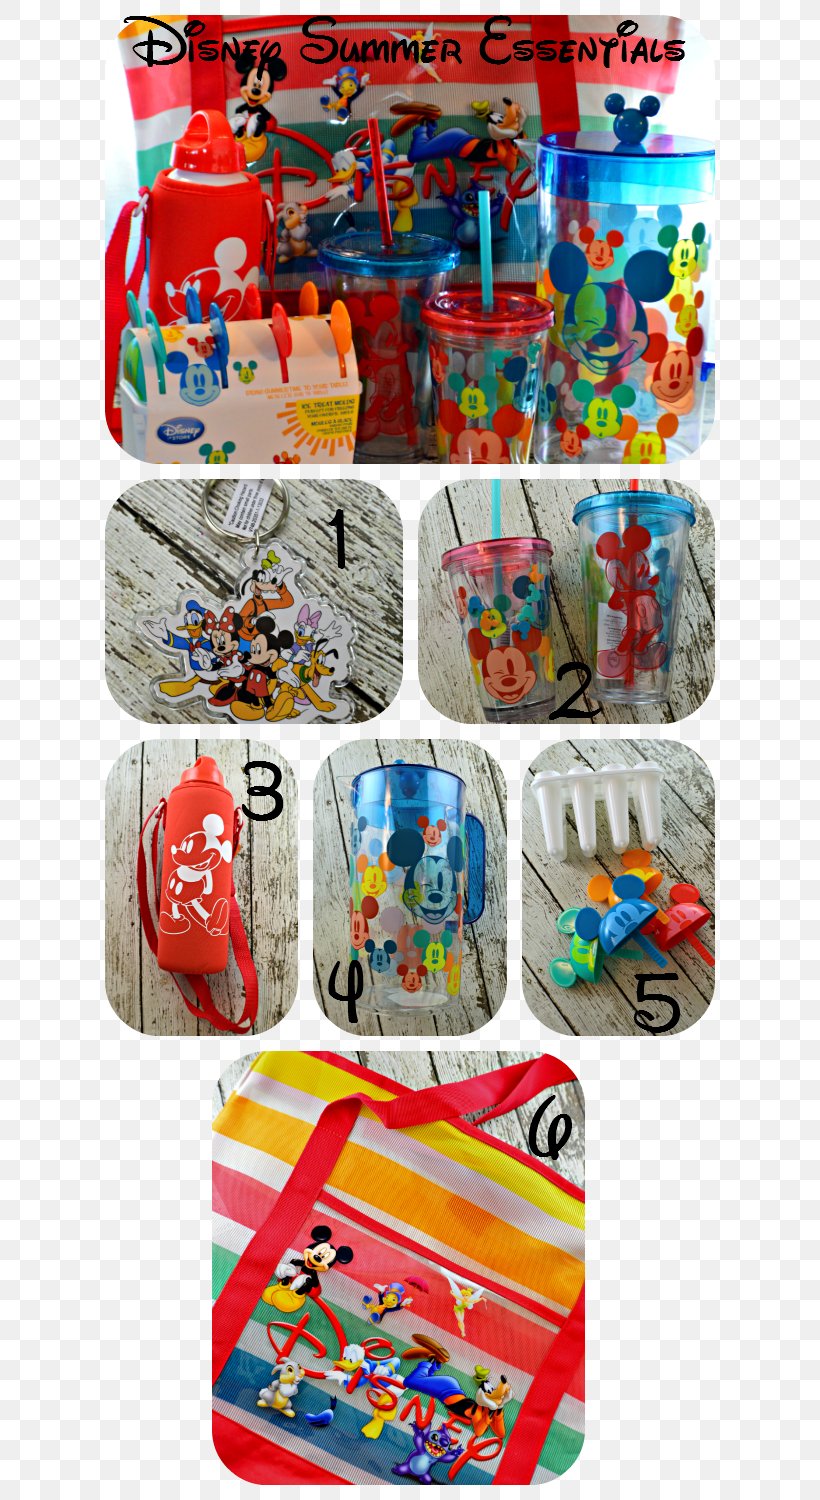 Toy Plastic Google Play, PNG, 640x1500px, Toy, Google Play, Material, Plastic, Play Download Free